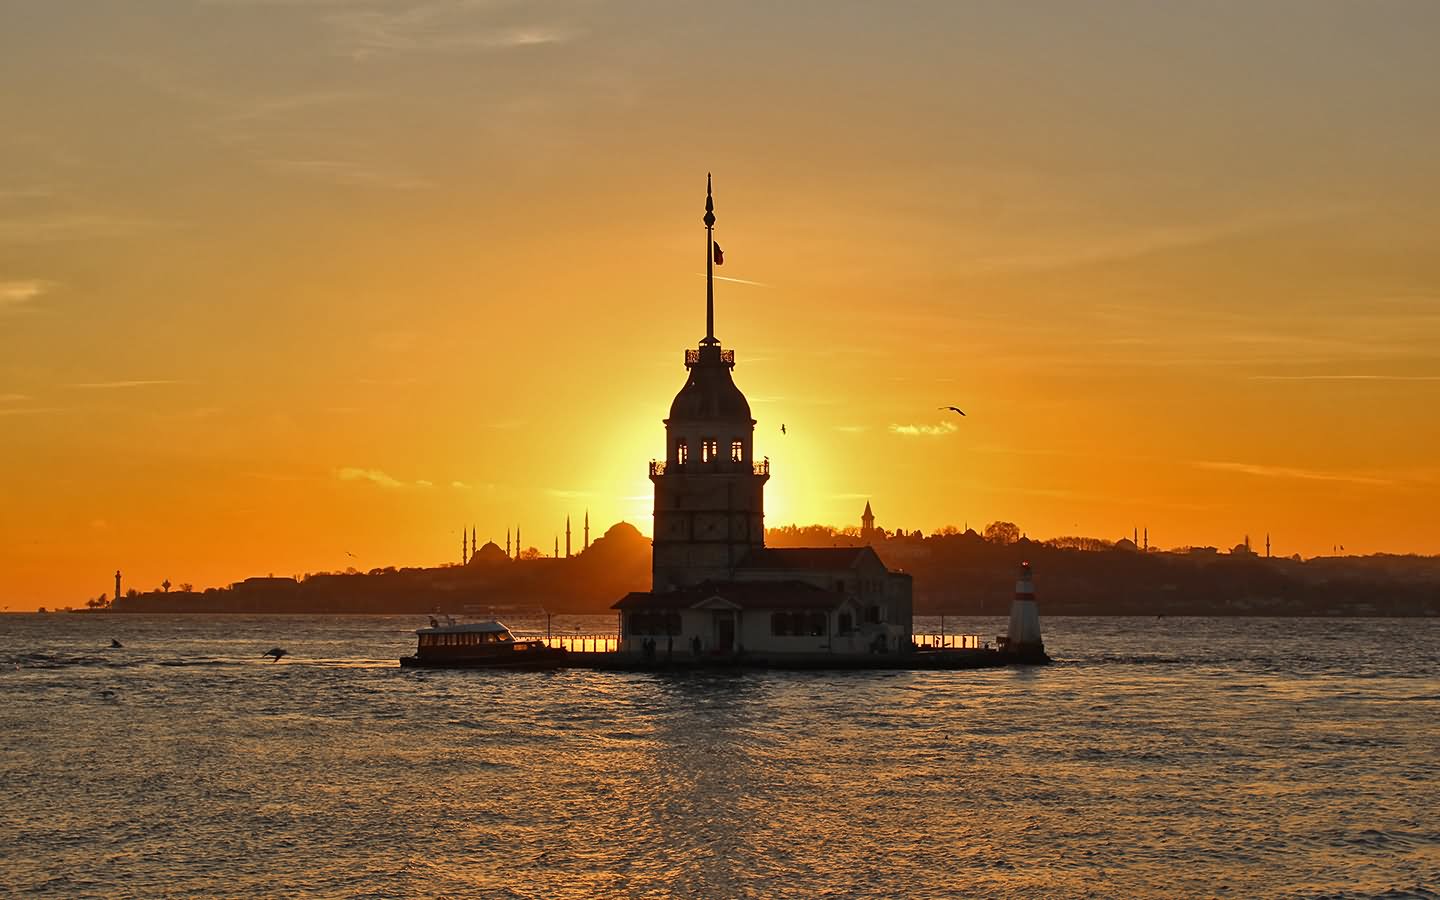 The Maiden's Tower At Sunset Image